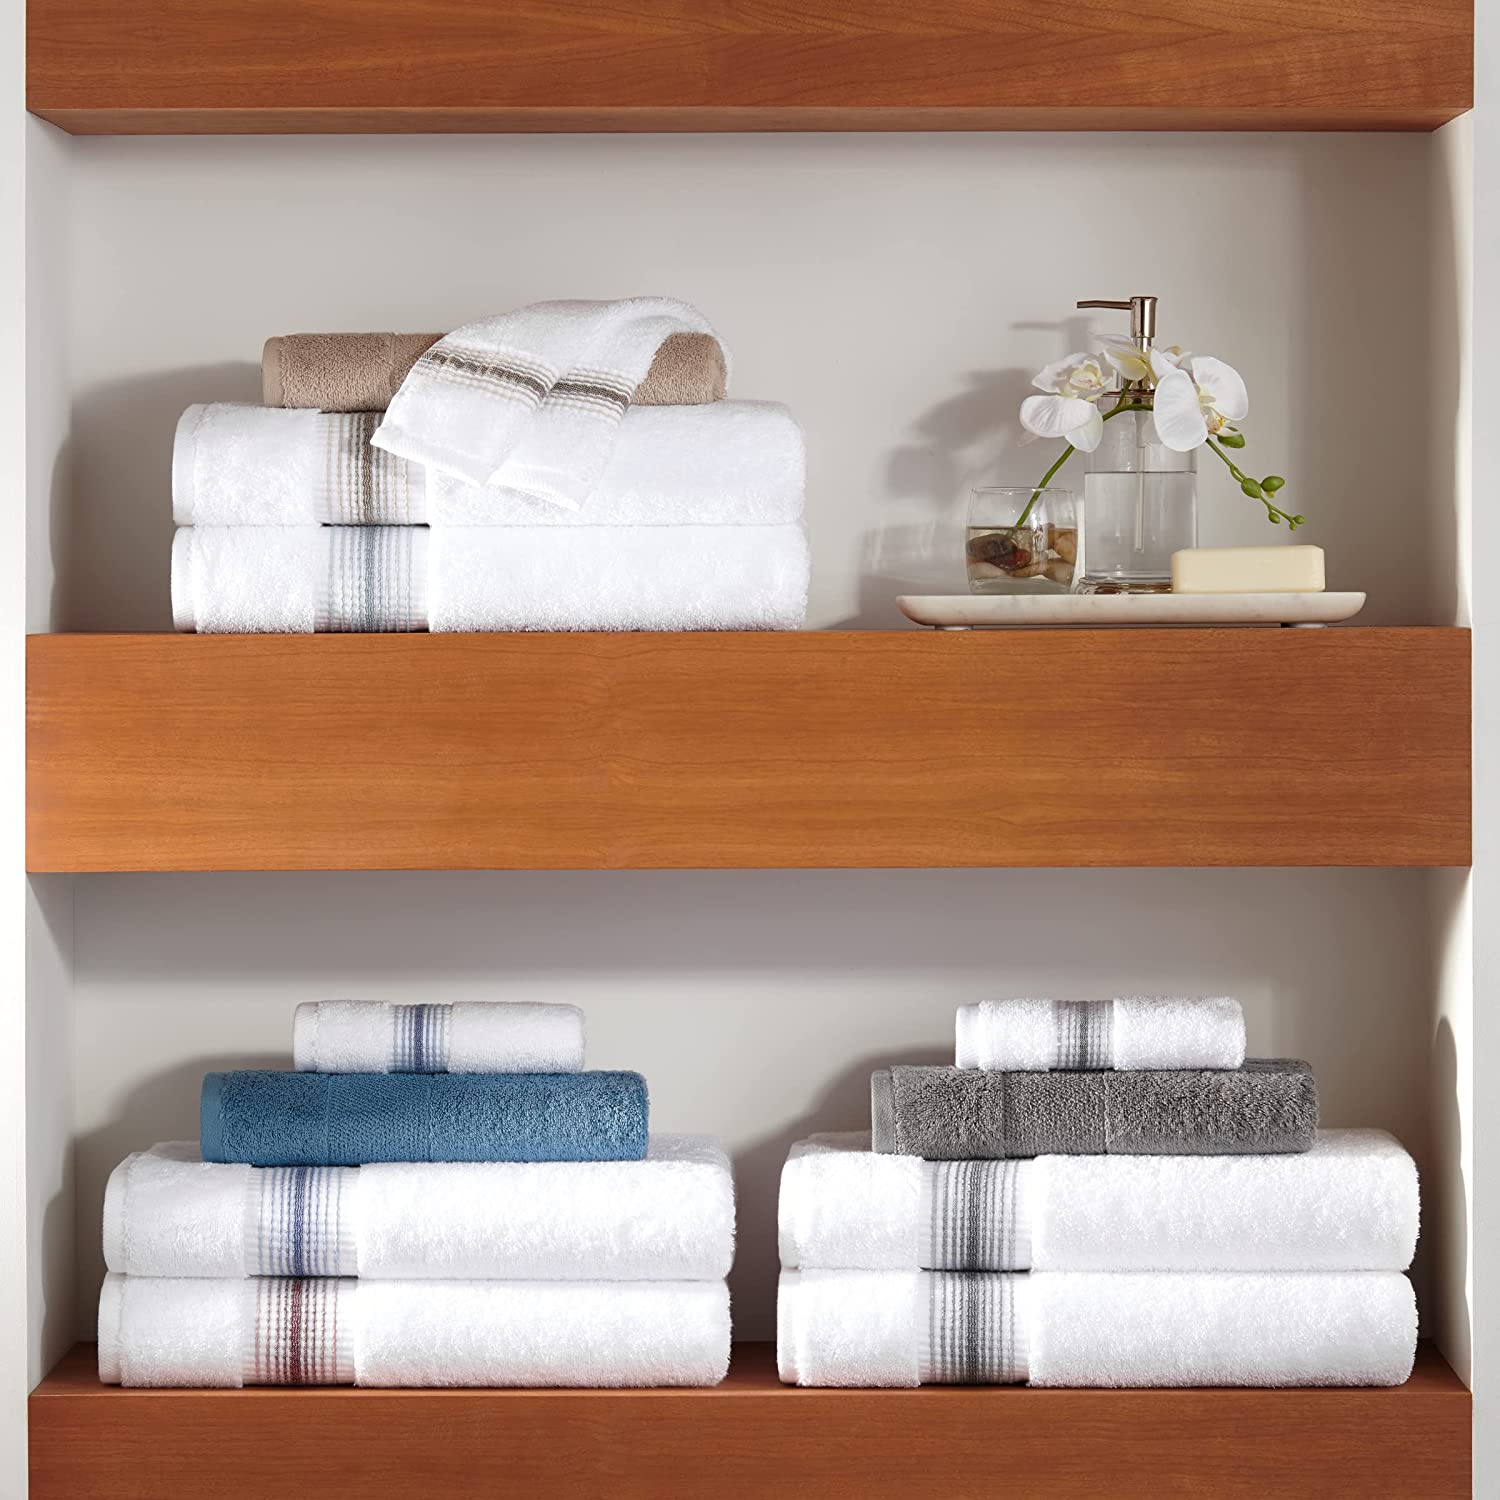 three turkish bath towels folded nicely on wooden shelves